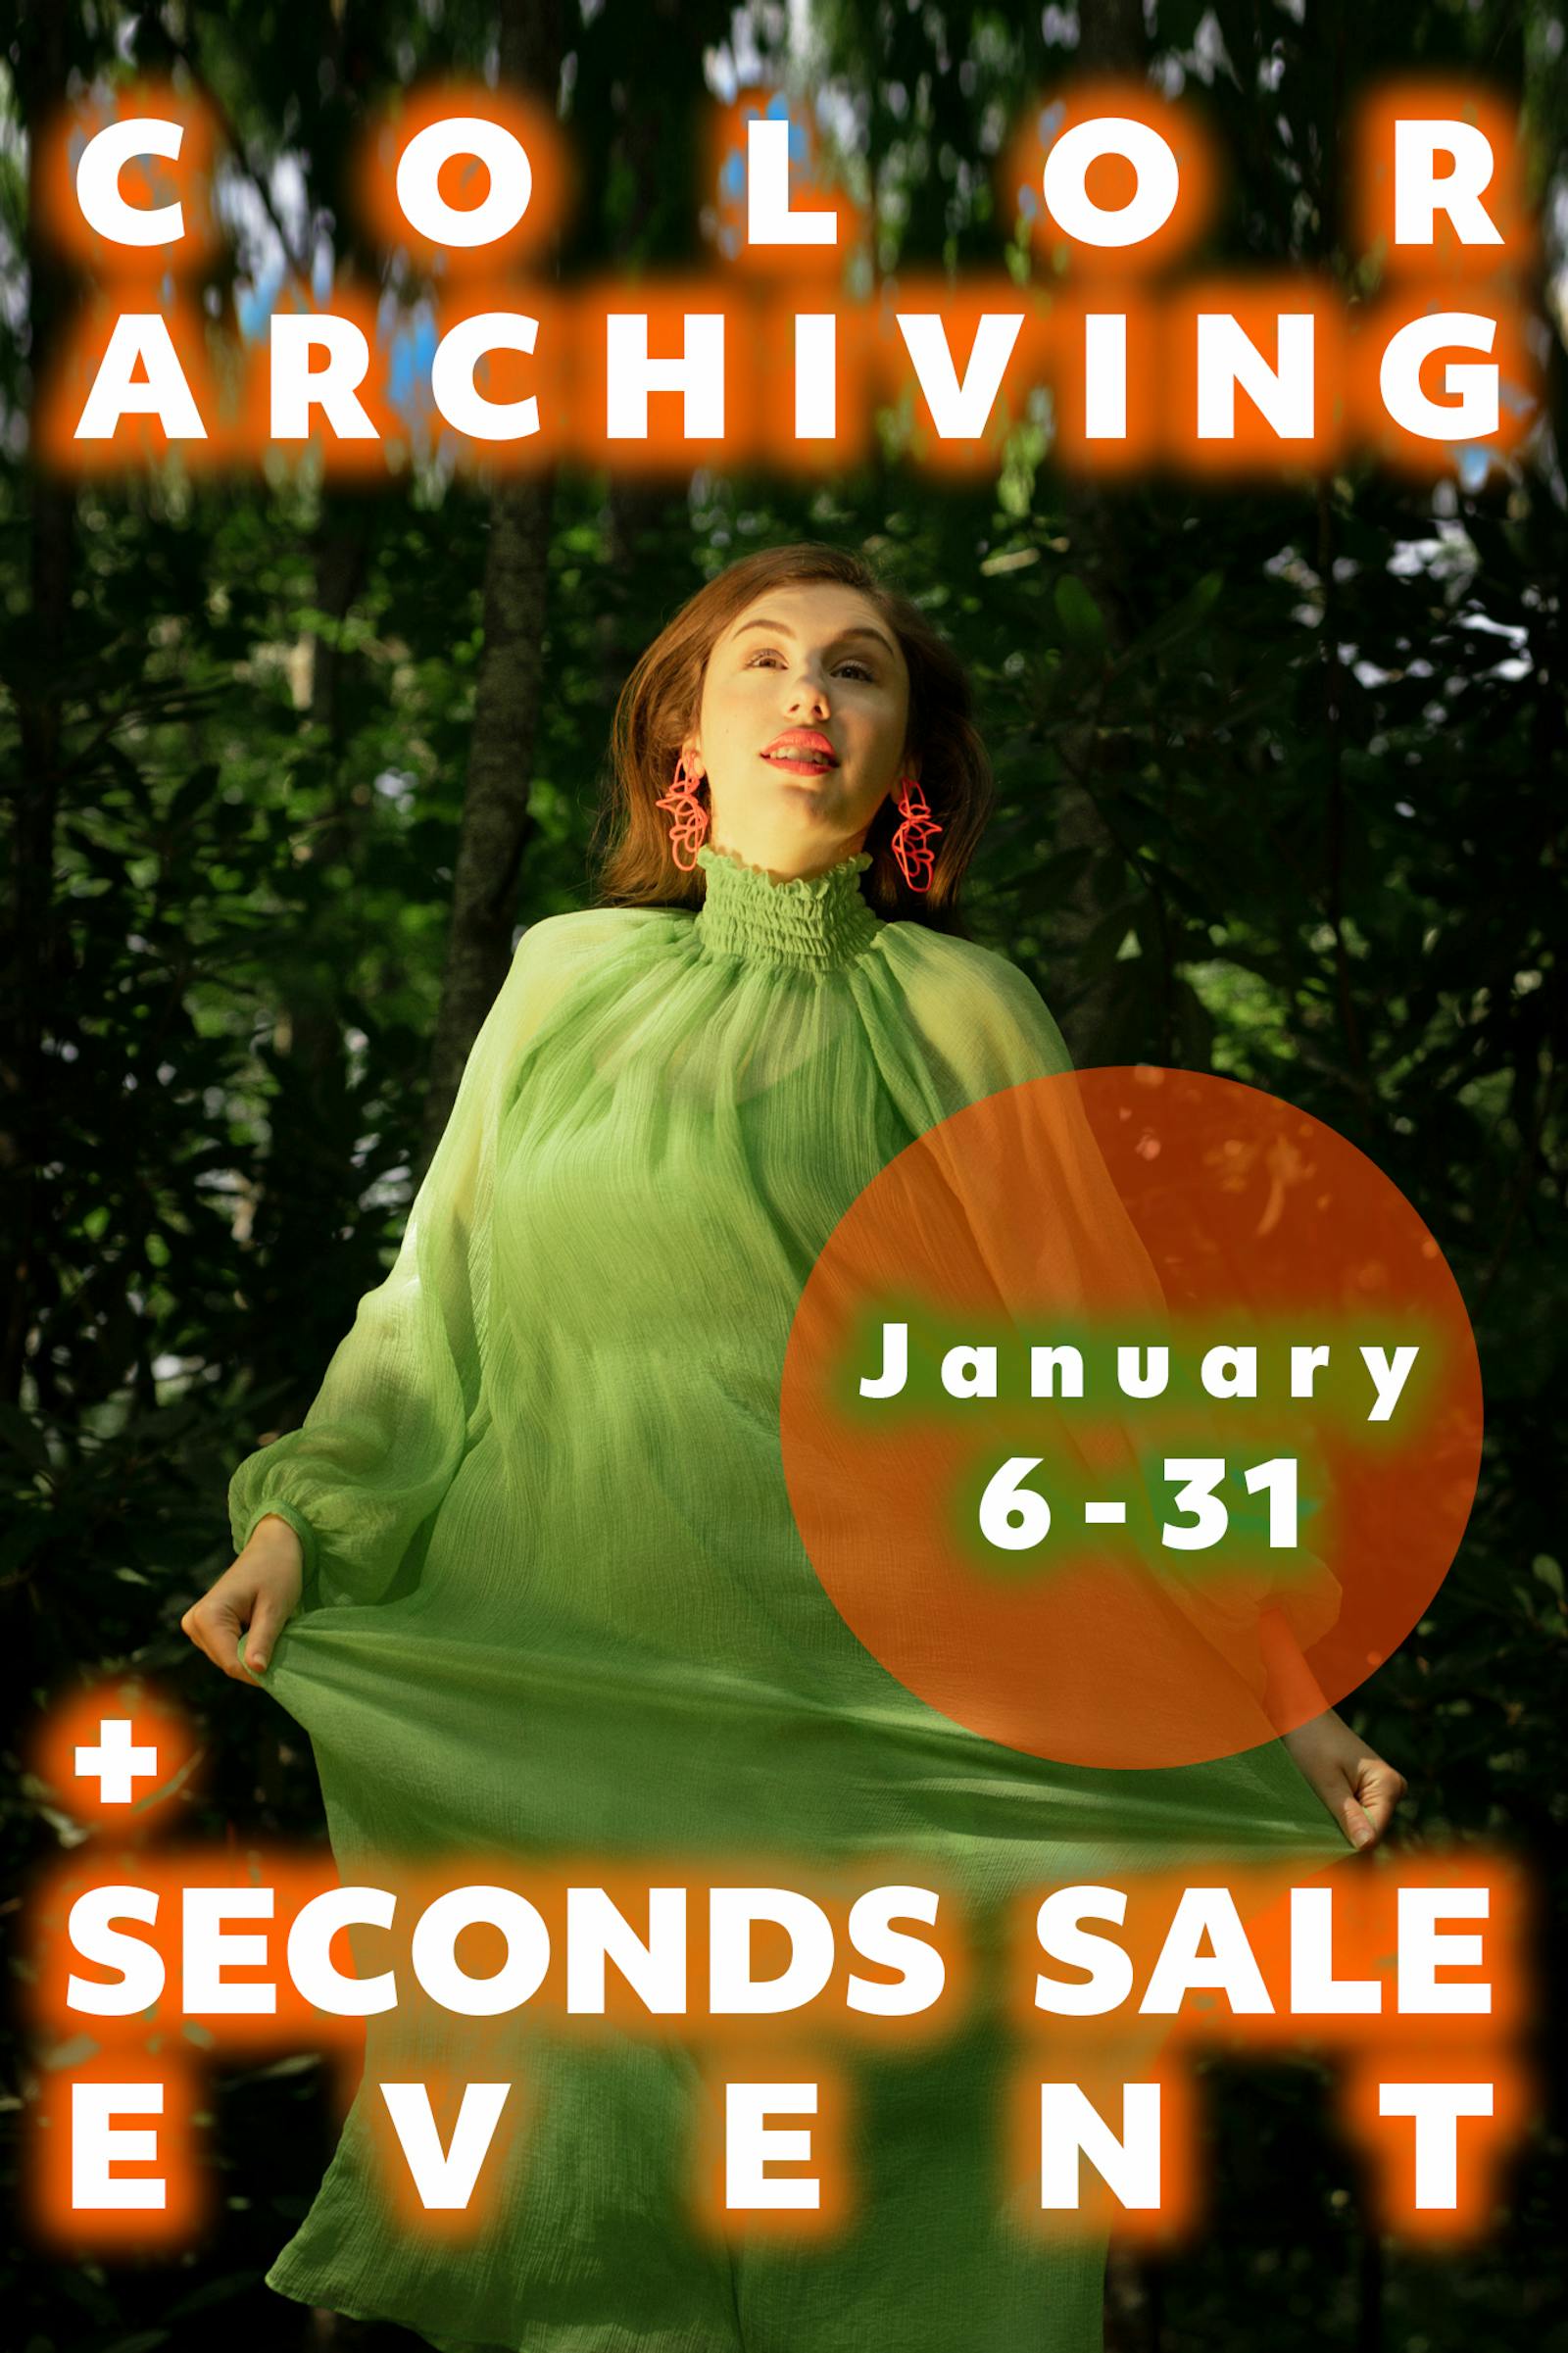 Archiving and Seconds Sale Event! 